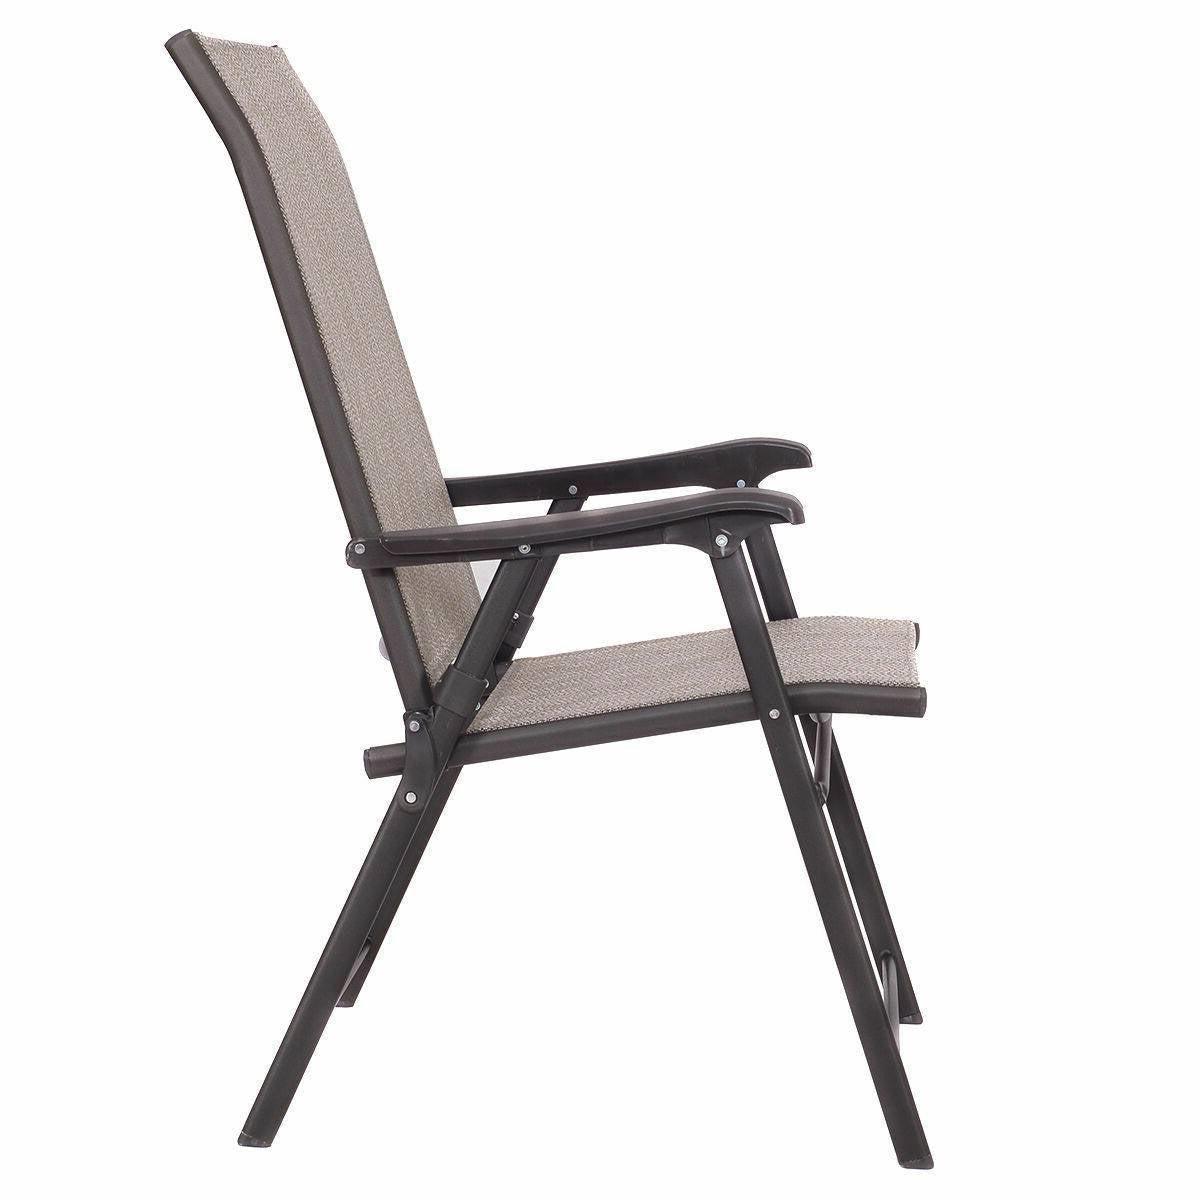 Outdoor > Outdoor Furniture > Patio Chairs - Set Of 2 Outdoor Folding Patio Chairs In Brown With Black Metal Frame